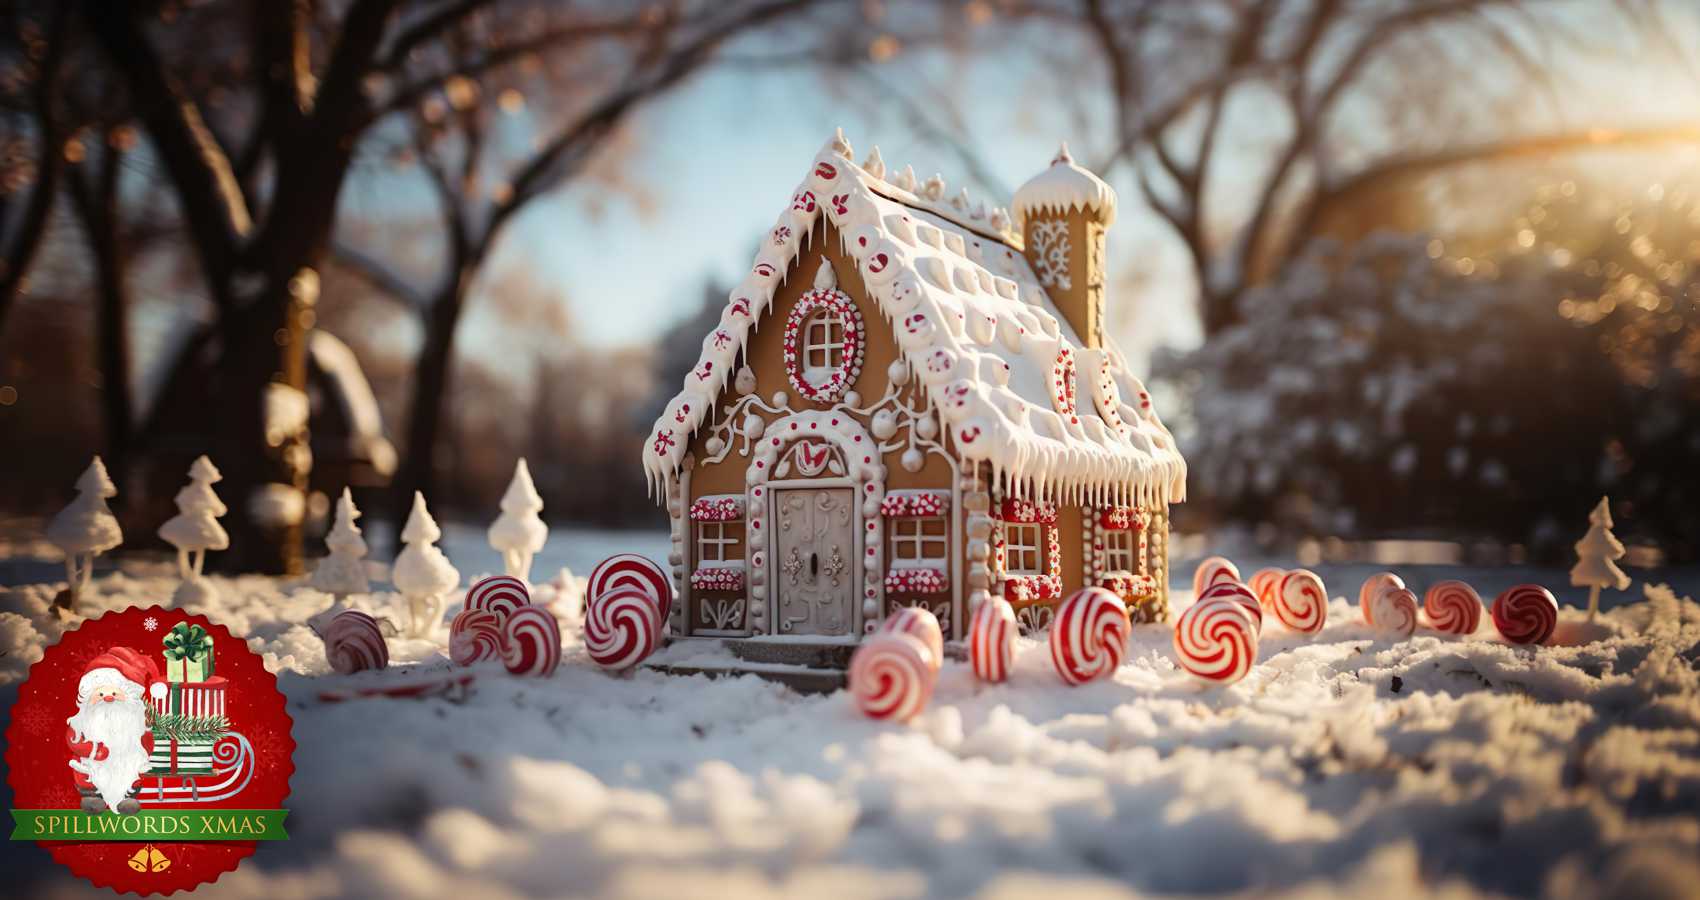 Gingerbread and Candy Canes, poetry by Alisa Guttadauro at Spillwords.com